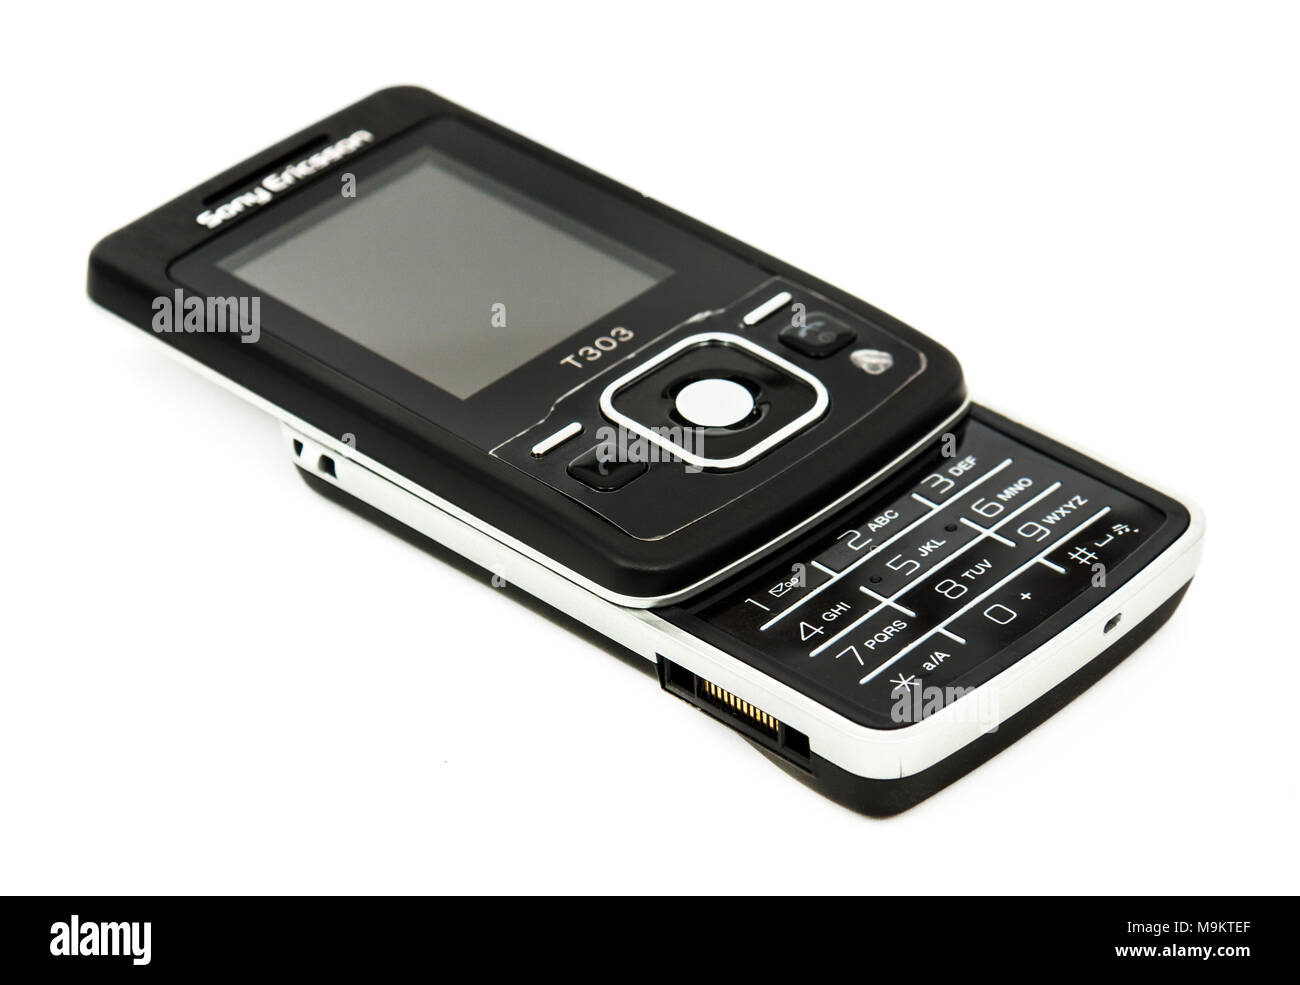 Sony Ericsson T303 mobile phone from 2008, weighing 90g and featuring a WAP browser to (very slowly) access the Internet before 3G/4G existed. Stock Photo